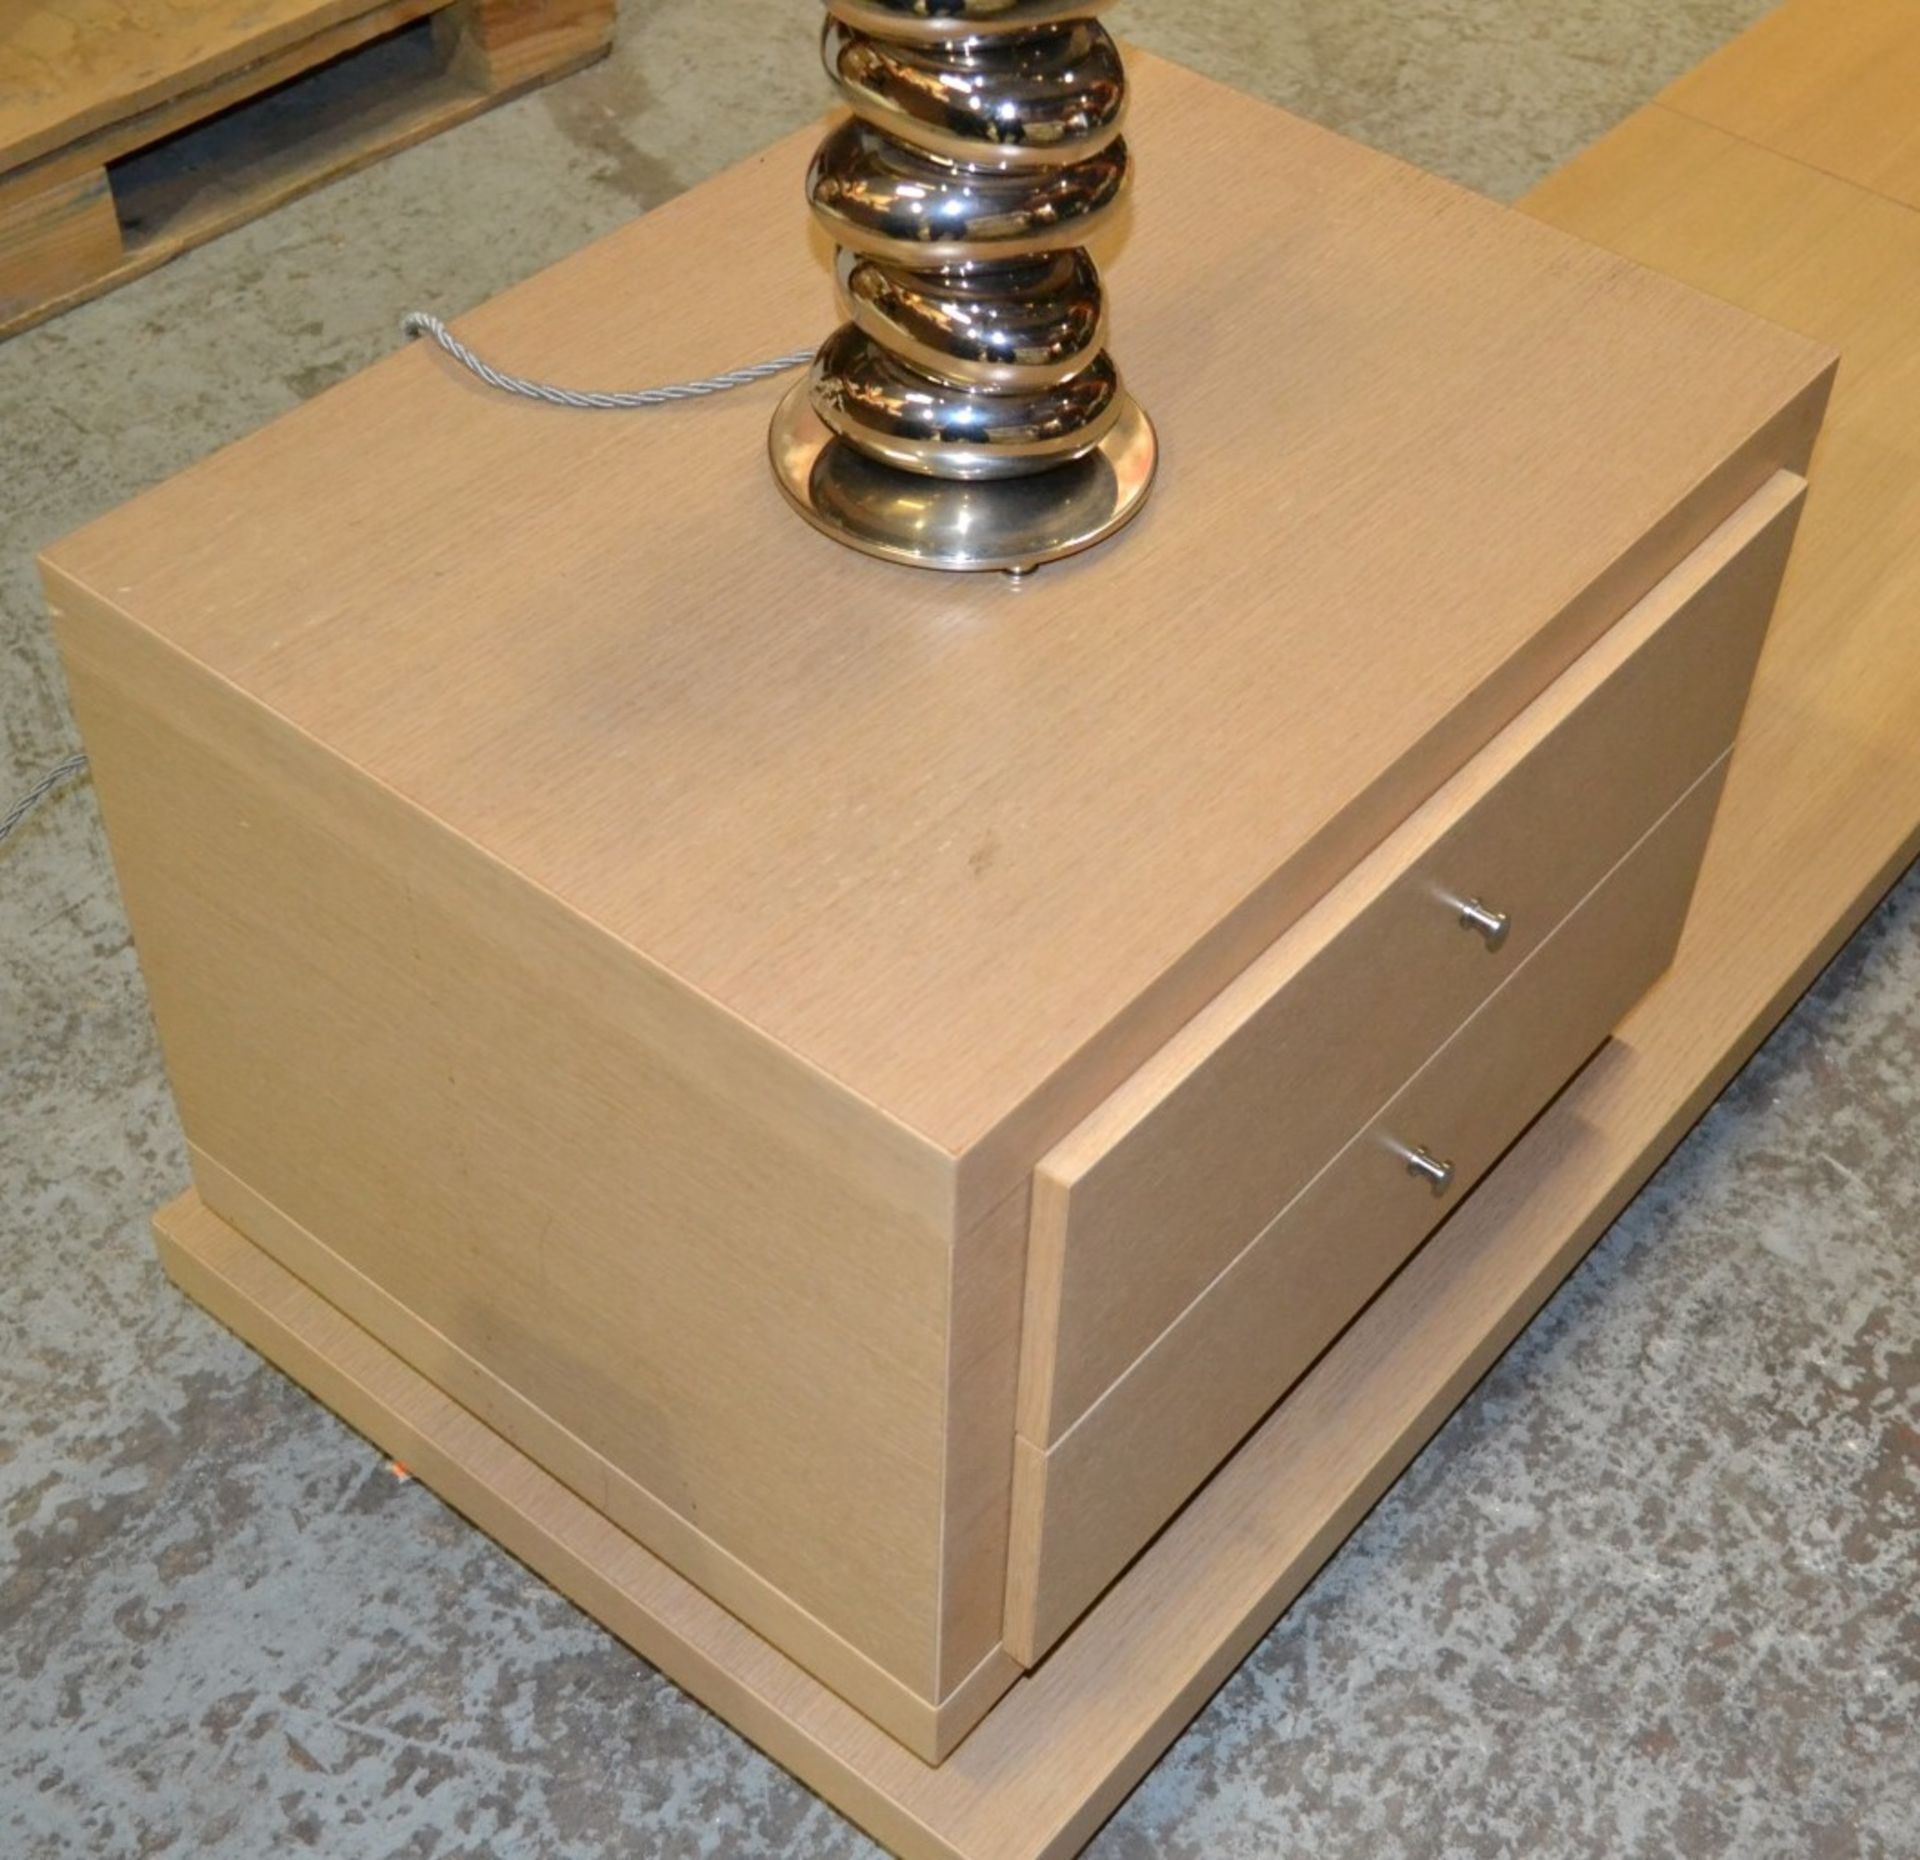 2 x Bedside Cabinets On Underbed Plinth With A Classic Oak Finish - 3 Metres Wide  - Used In Good - Image 6 of 8